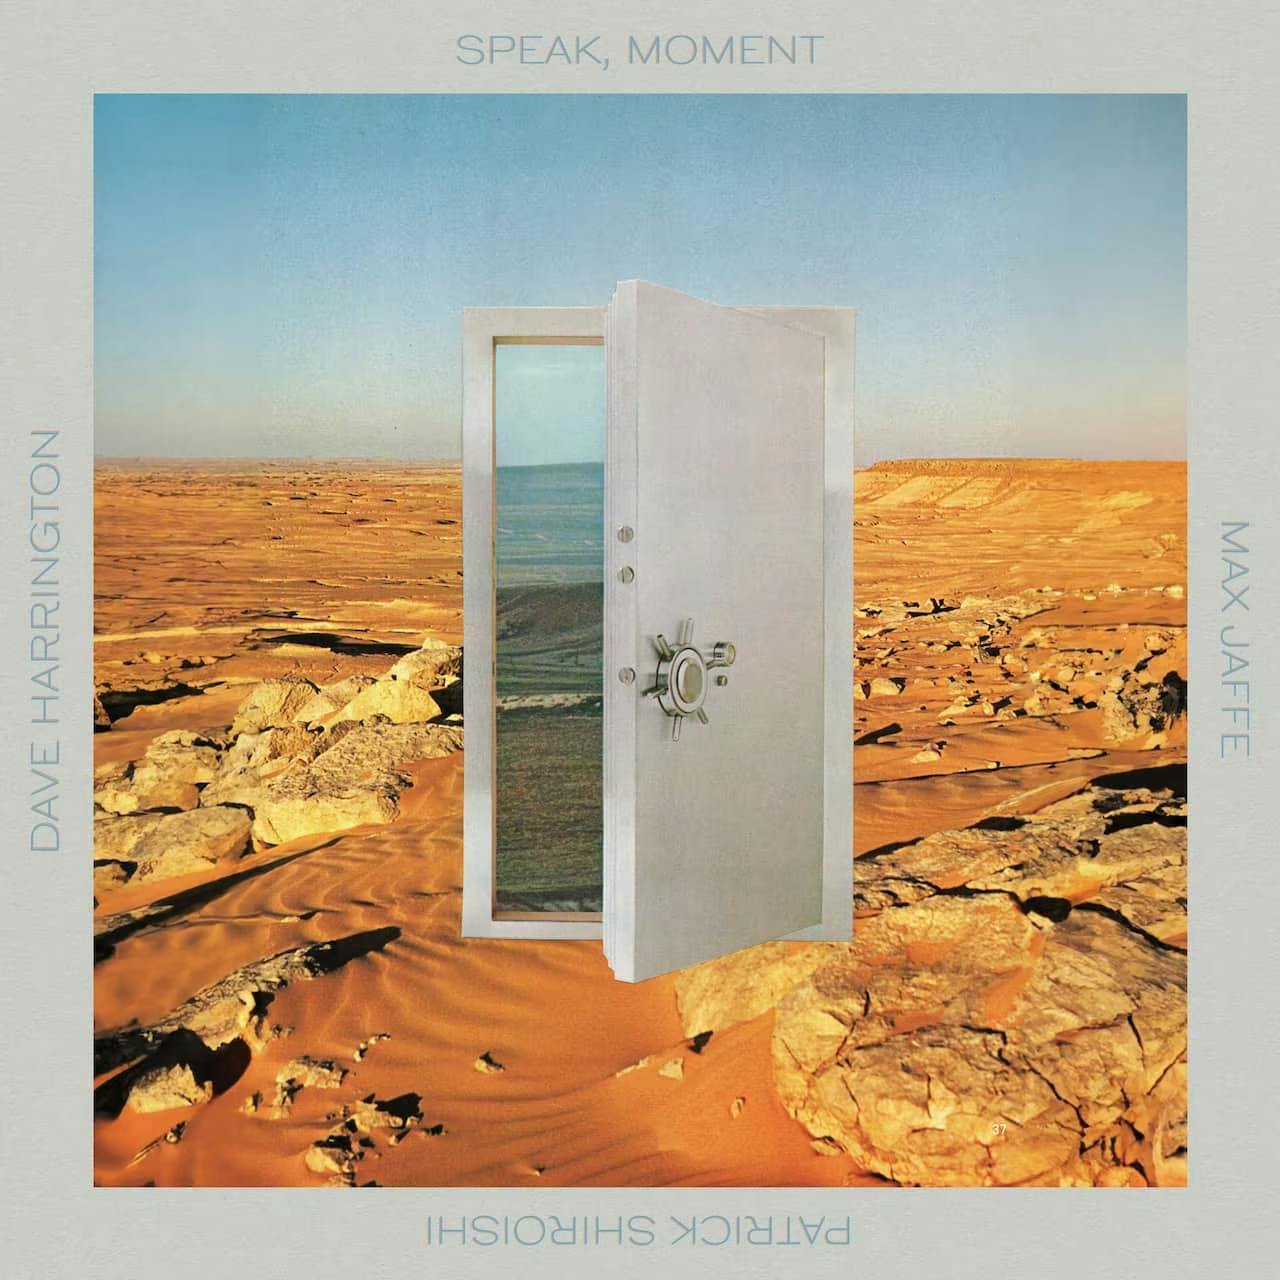 The album cover art for Speak, Moment featuring collage of a an open door on a desert background.